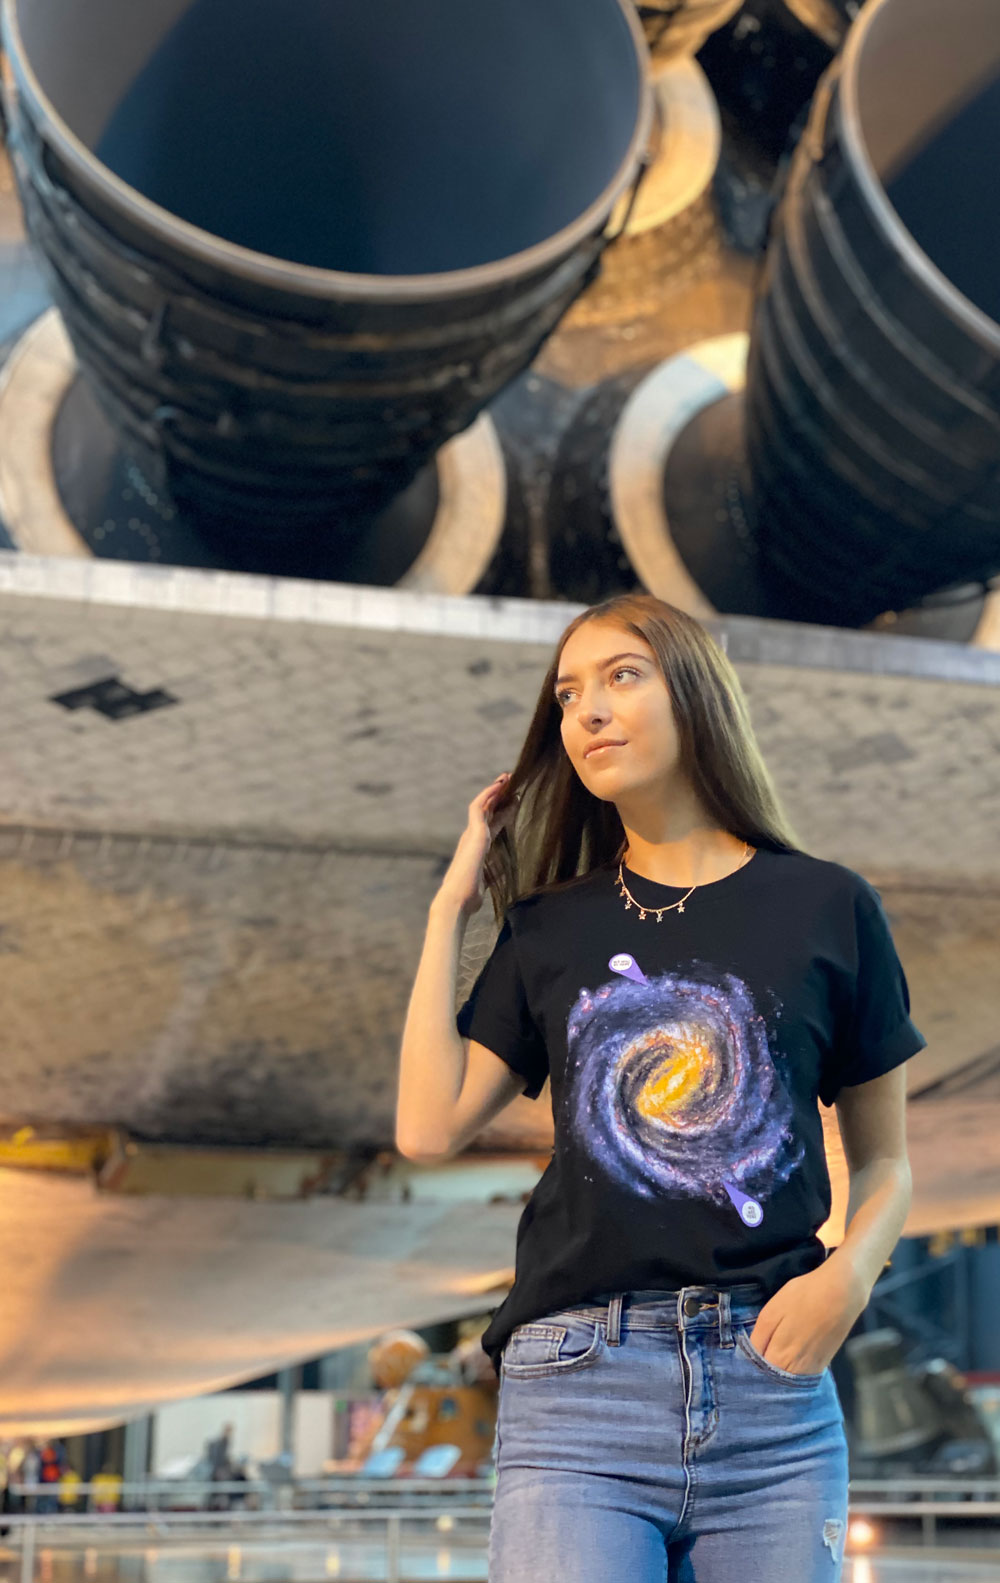 This Svaha black, short-sleeve unisex adult t-shirt features a witty astronomy-inspired design called “We will be there” showing that in a few billions years, we might be on a new Earth-like planet.